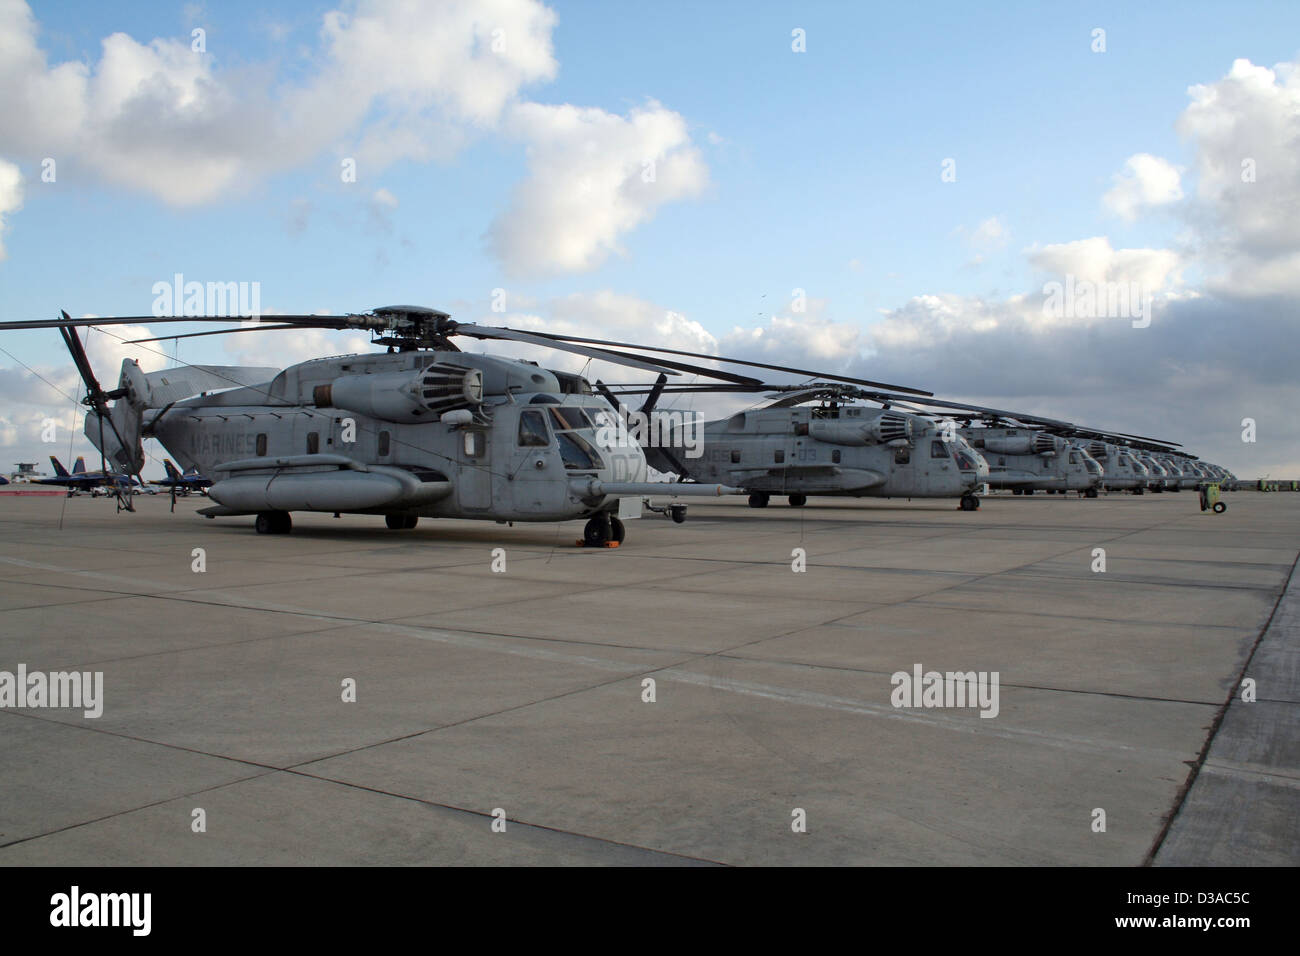 Row of US Marines CH-53 Stallion helicopters at the Air Station Miramar, California Stock Photo